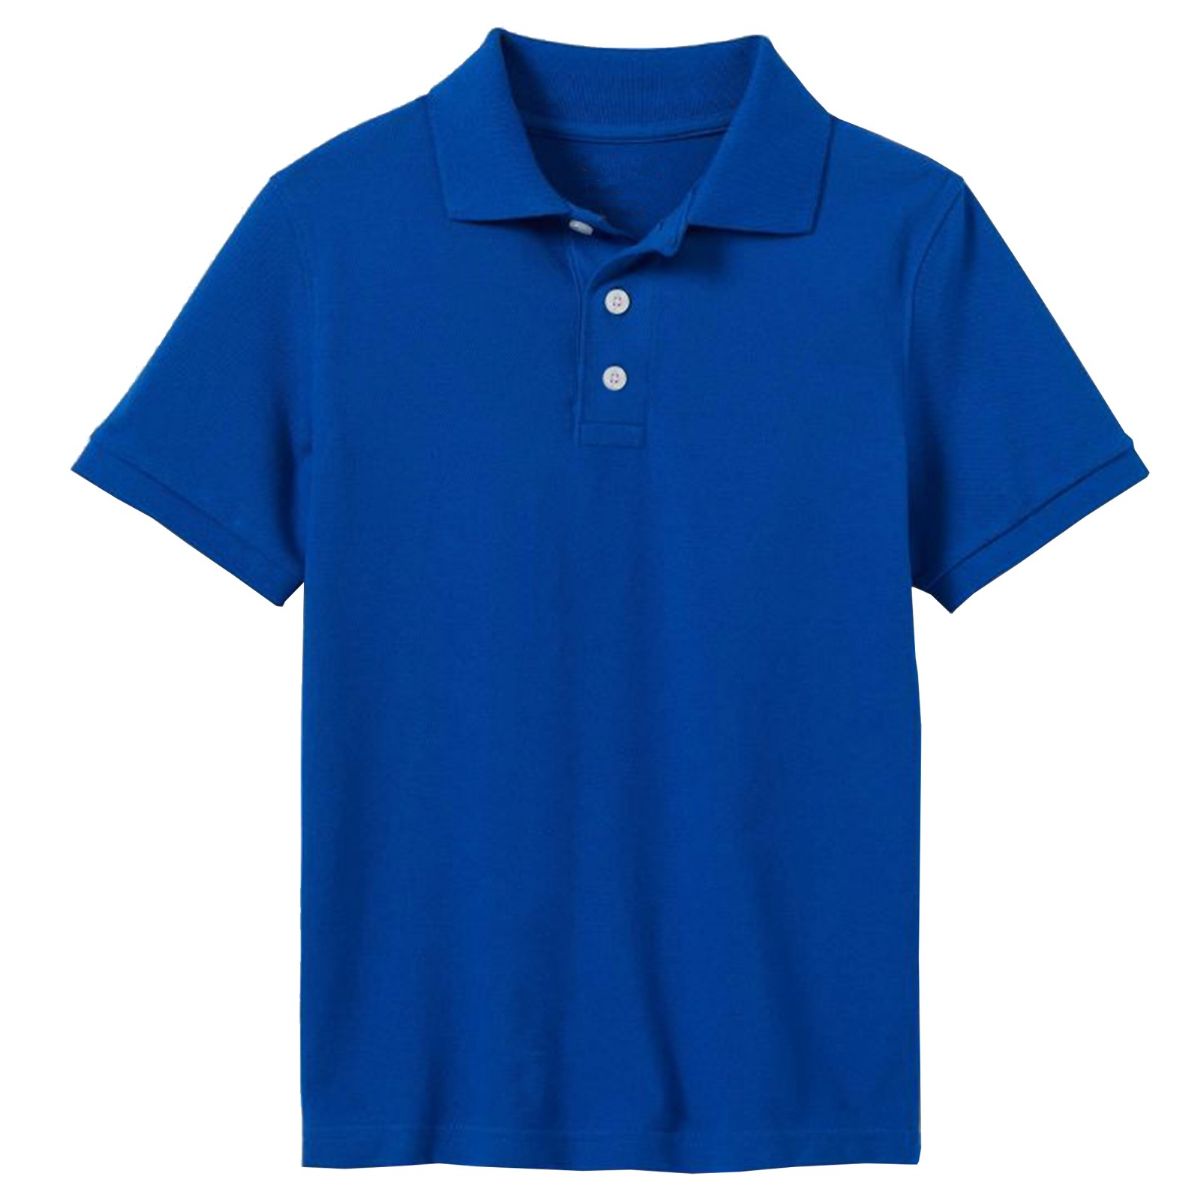 24 Pieces of Youth Polo Shirt Royal Blue In Size xl